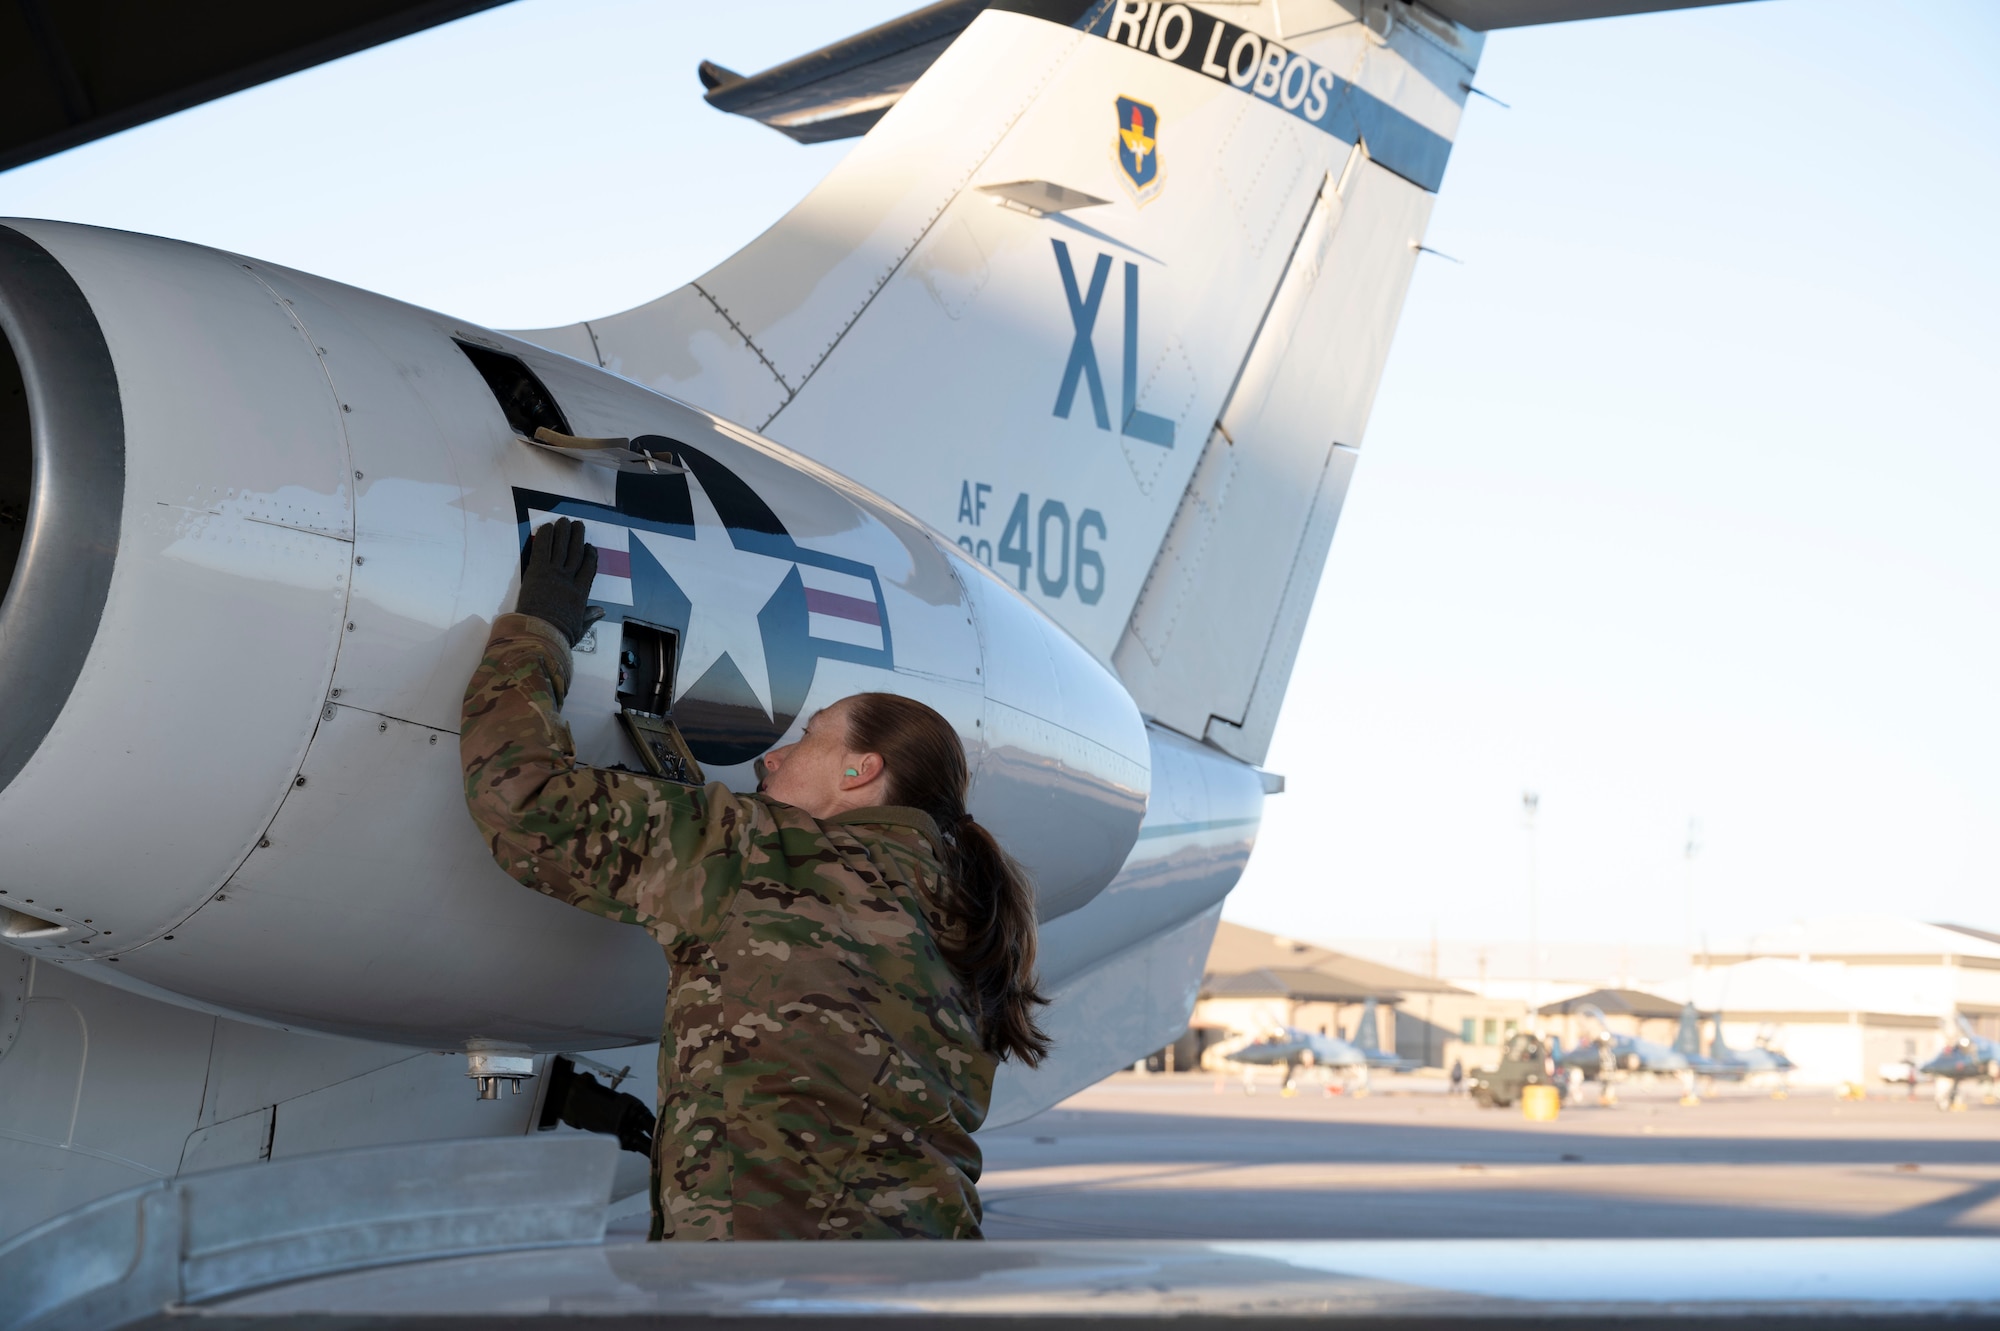 U.S. Air Force Capt. Tabitha Letourneau, 86th Flying Training Squadron instructor pilot, inspects the tail of a T-1A Jayhawk at Laughlin Air Force Base, Texas, Jan. 9, 2024. Letourneau is the first instructor pilot to fly with an unrated student pilot in the Air Force, a new change in policy brought to fruition by Letourneau and the Department of the Air Force Women’s Initiative Team. (U.S. Air Force photo by Senior Airman Kailee Reynolds)